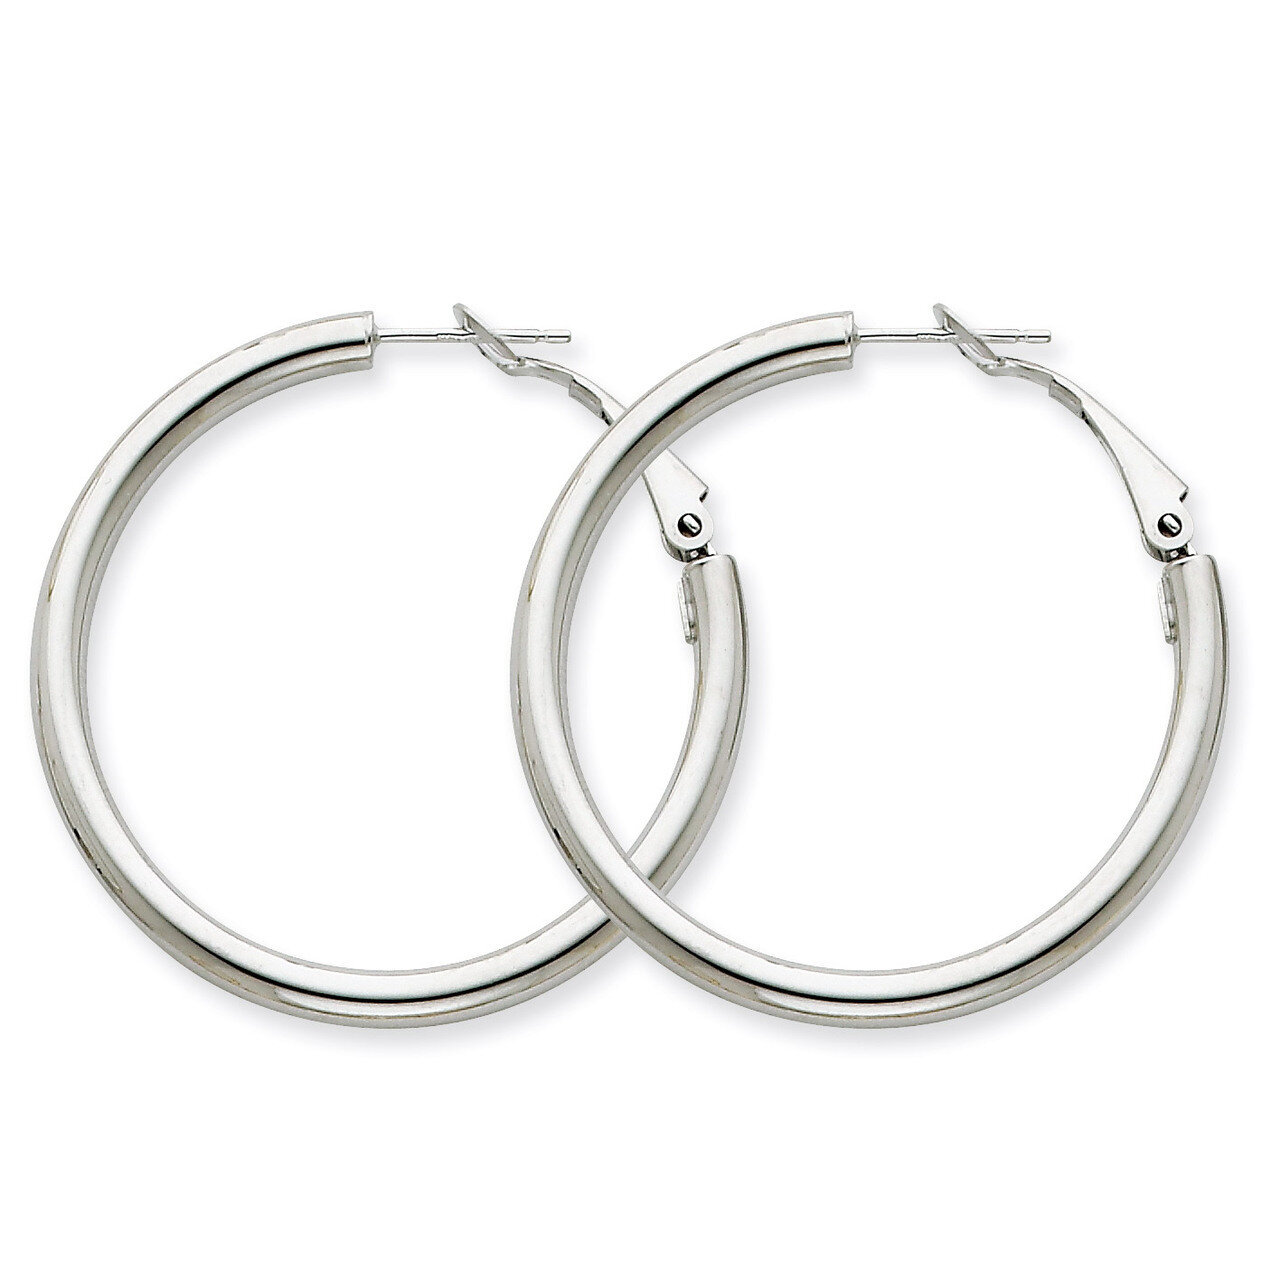 3x30mm Polished Round Hoop Earrings 14k White Gold PRE223W